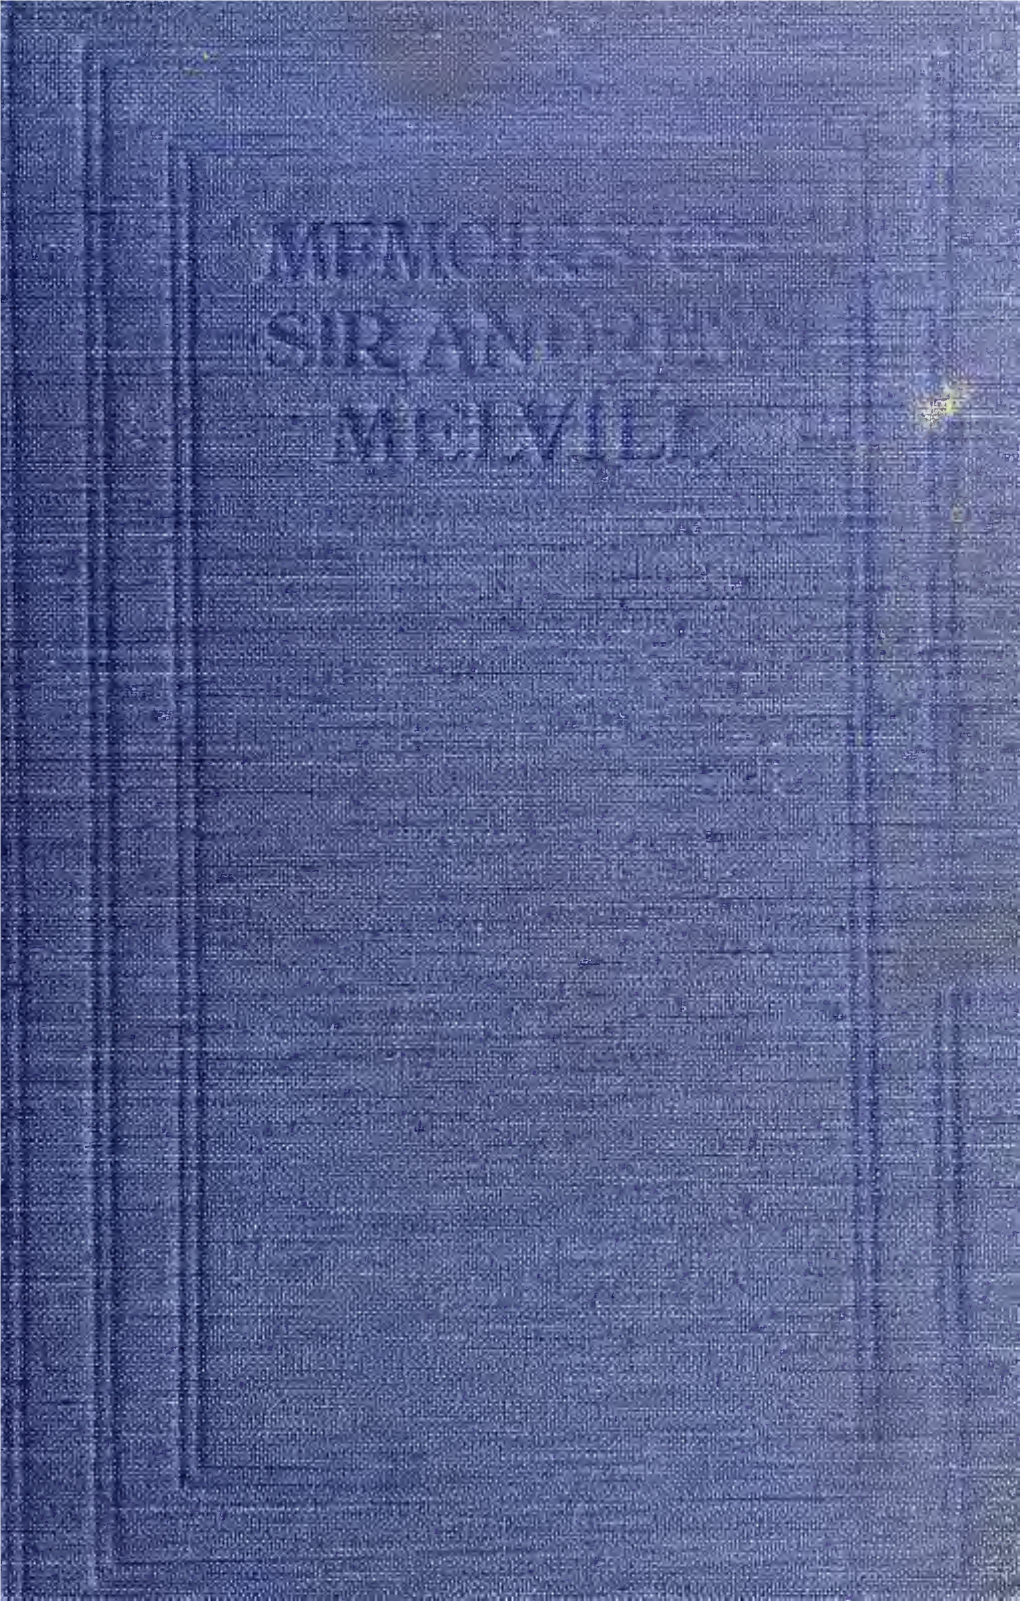 Memoirs of Sir Andrew Melvill Translated from the French, and the Wars of the Seventeenth Century by Torick Ameer-Ali with a Foreword by Sir Ian Hamilton